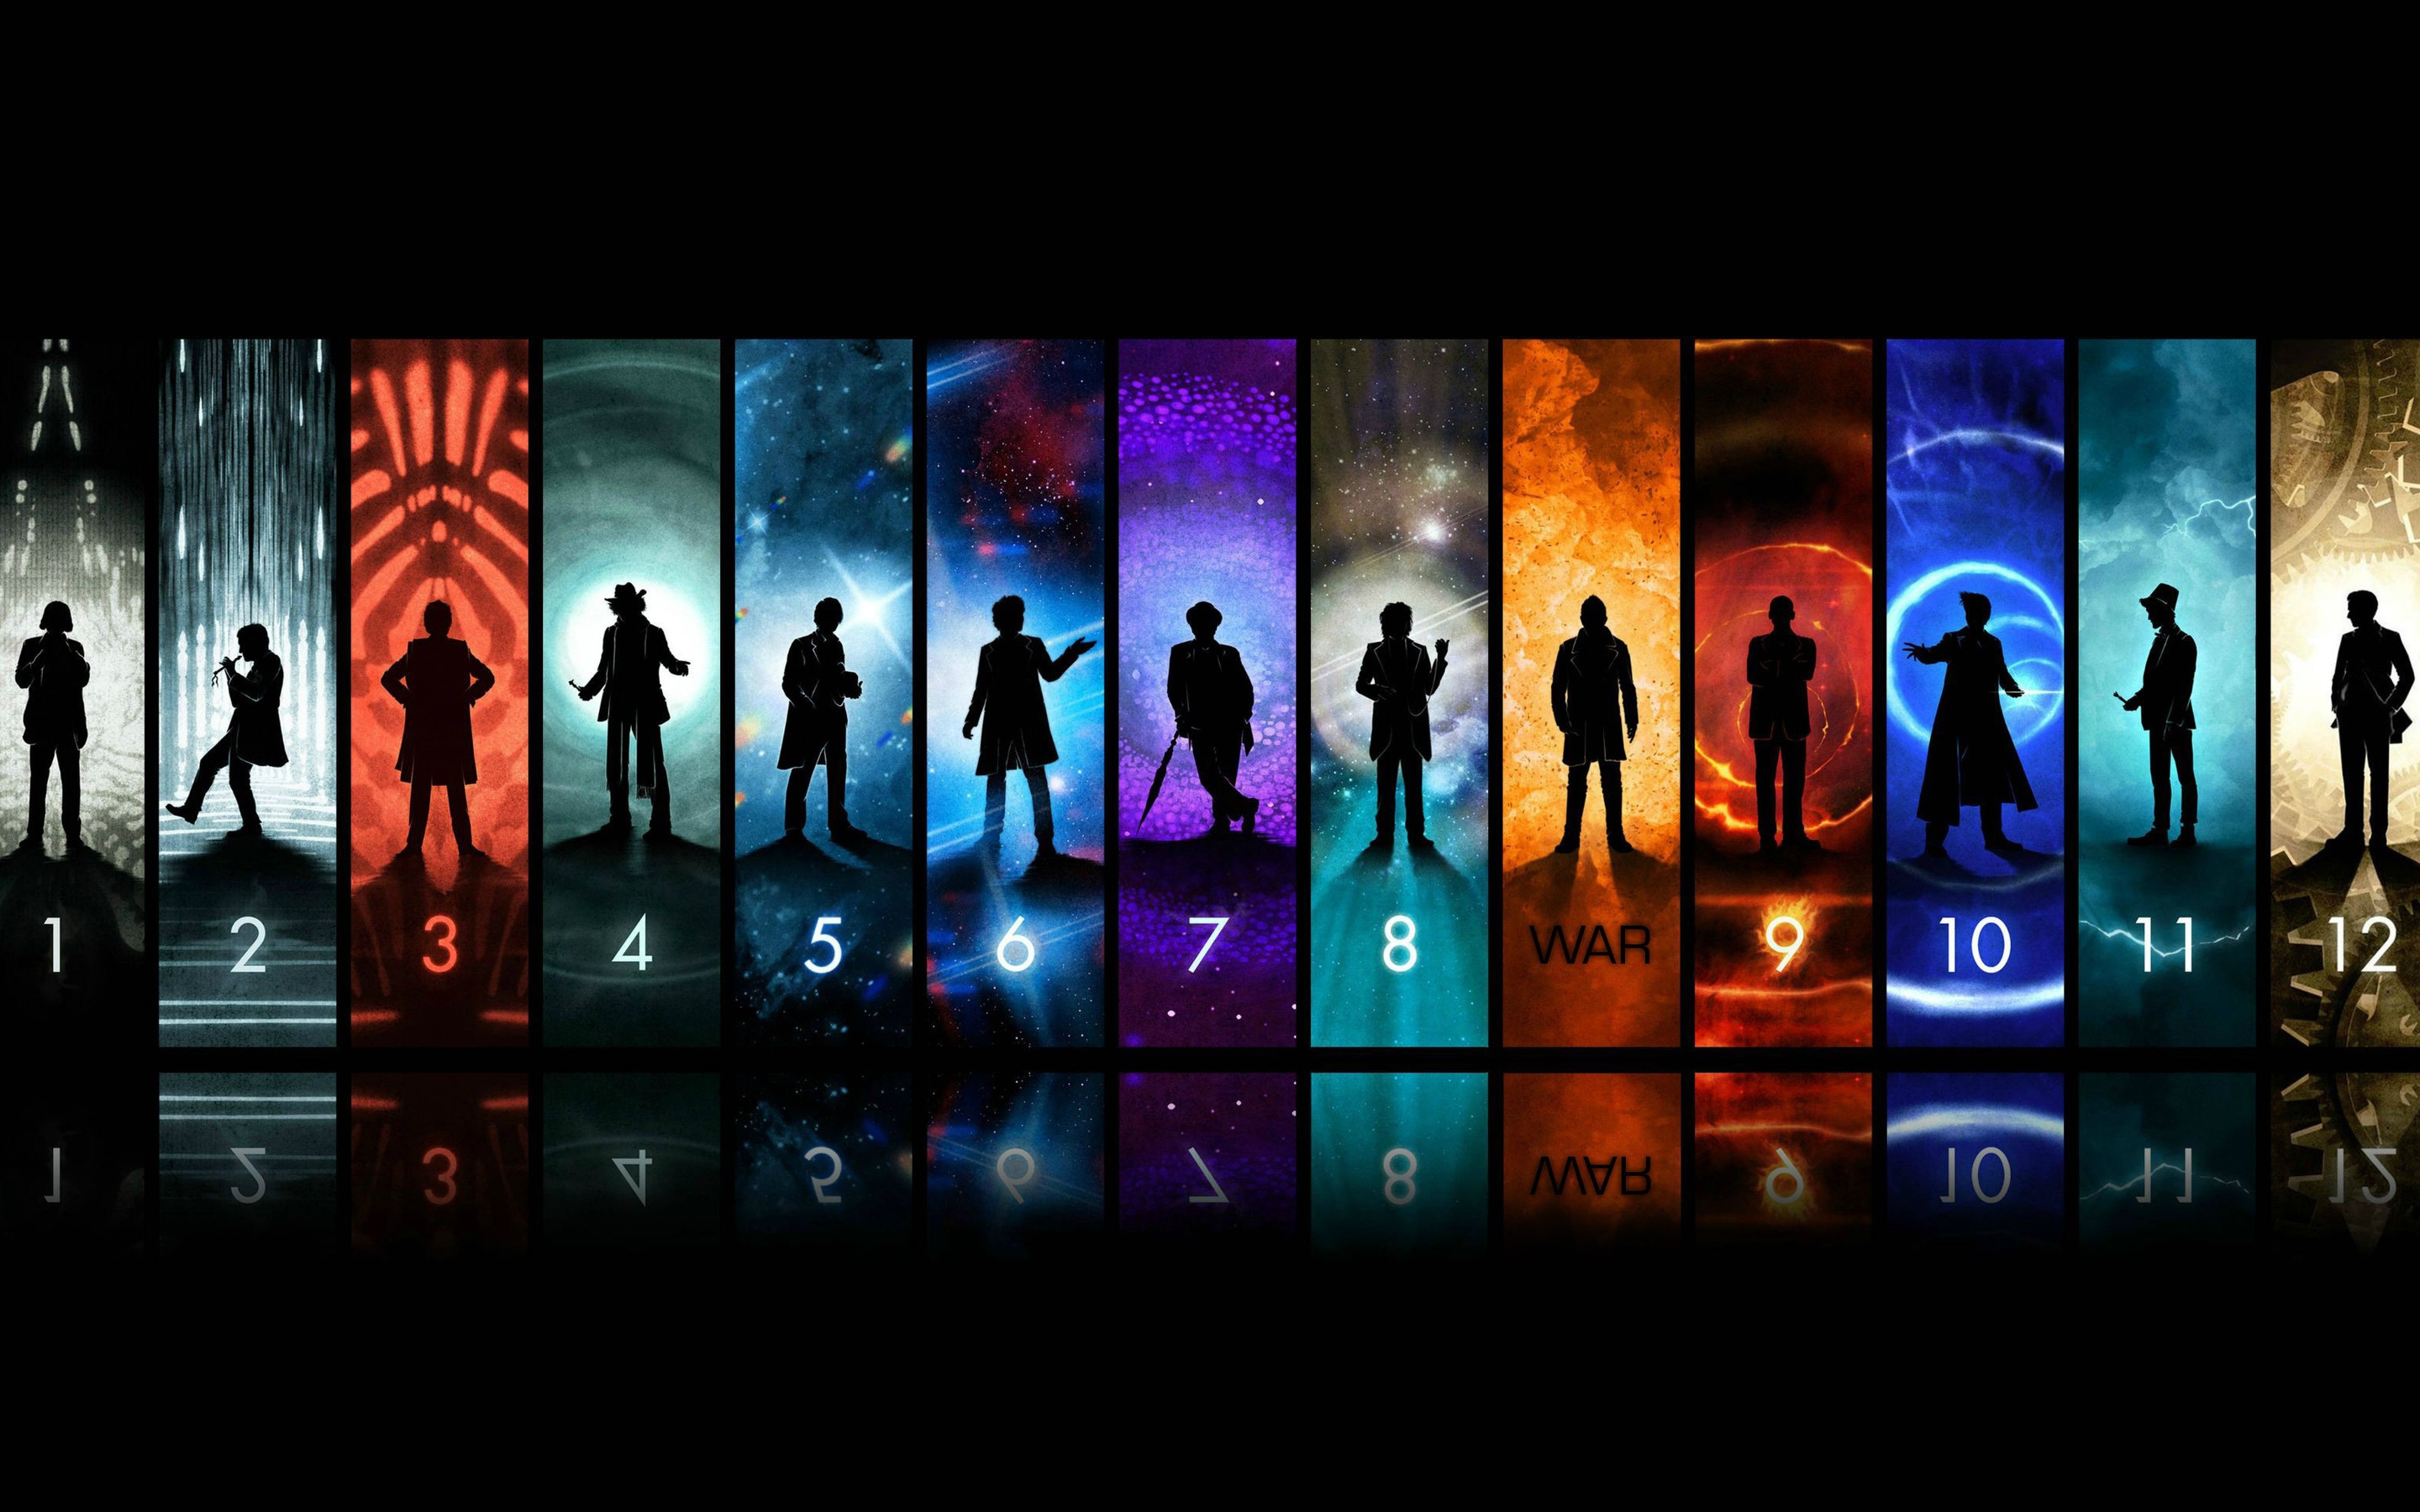 Heroes Reborn Characters for 2880 x 1800 Retina Display resolution